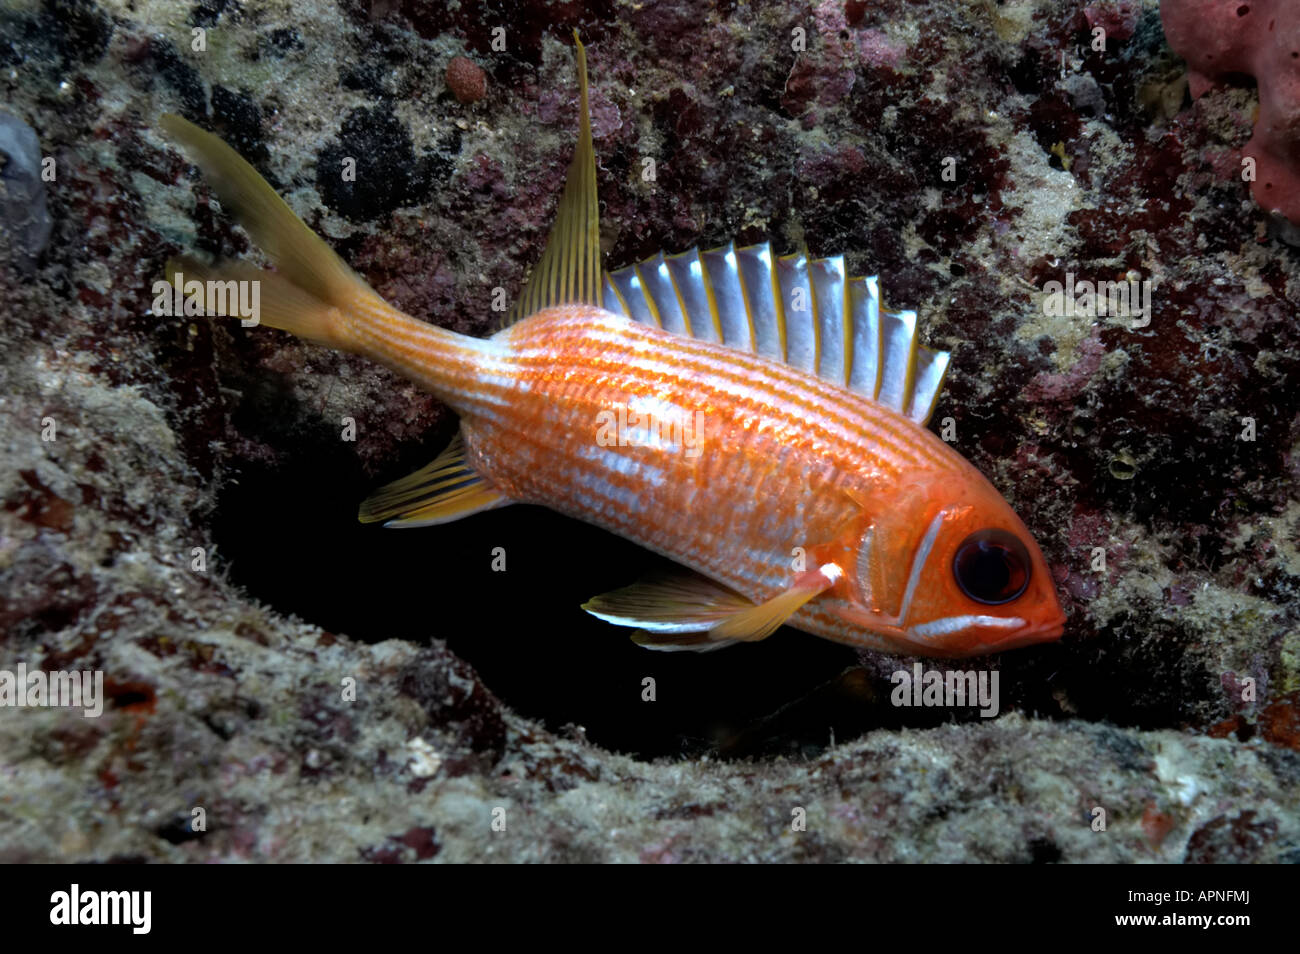 A Longspine Squirrelfish shows his bright orange color against a subdued background near Boynton Beach, Florida. Stock Photo